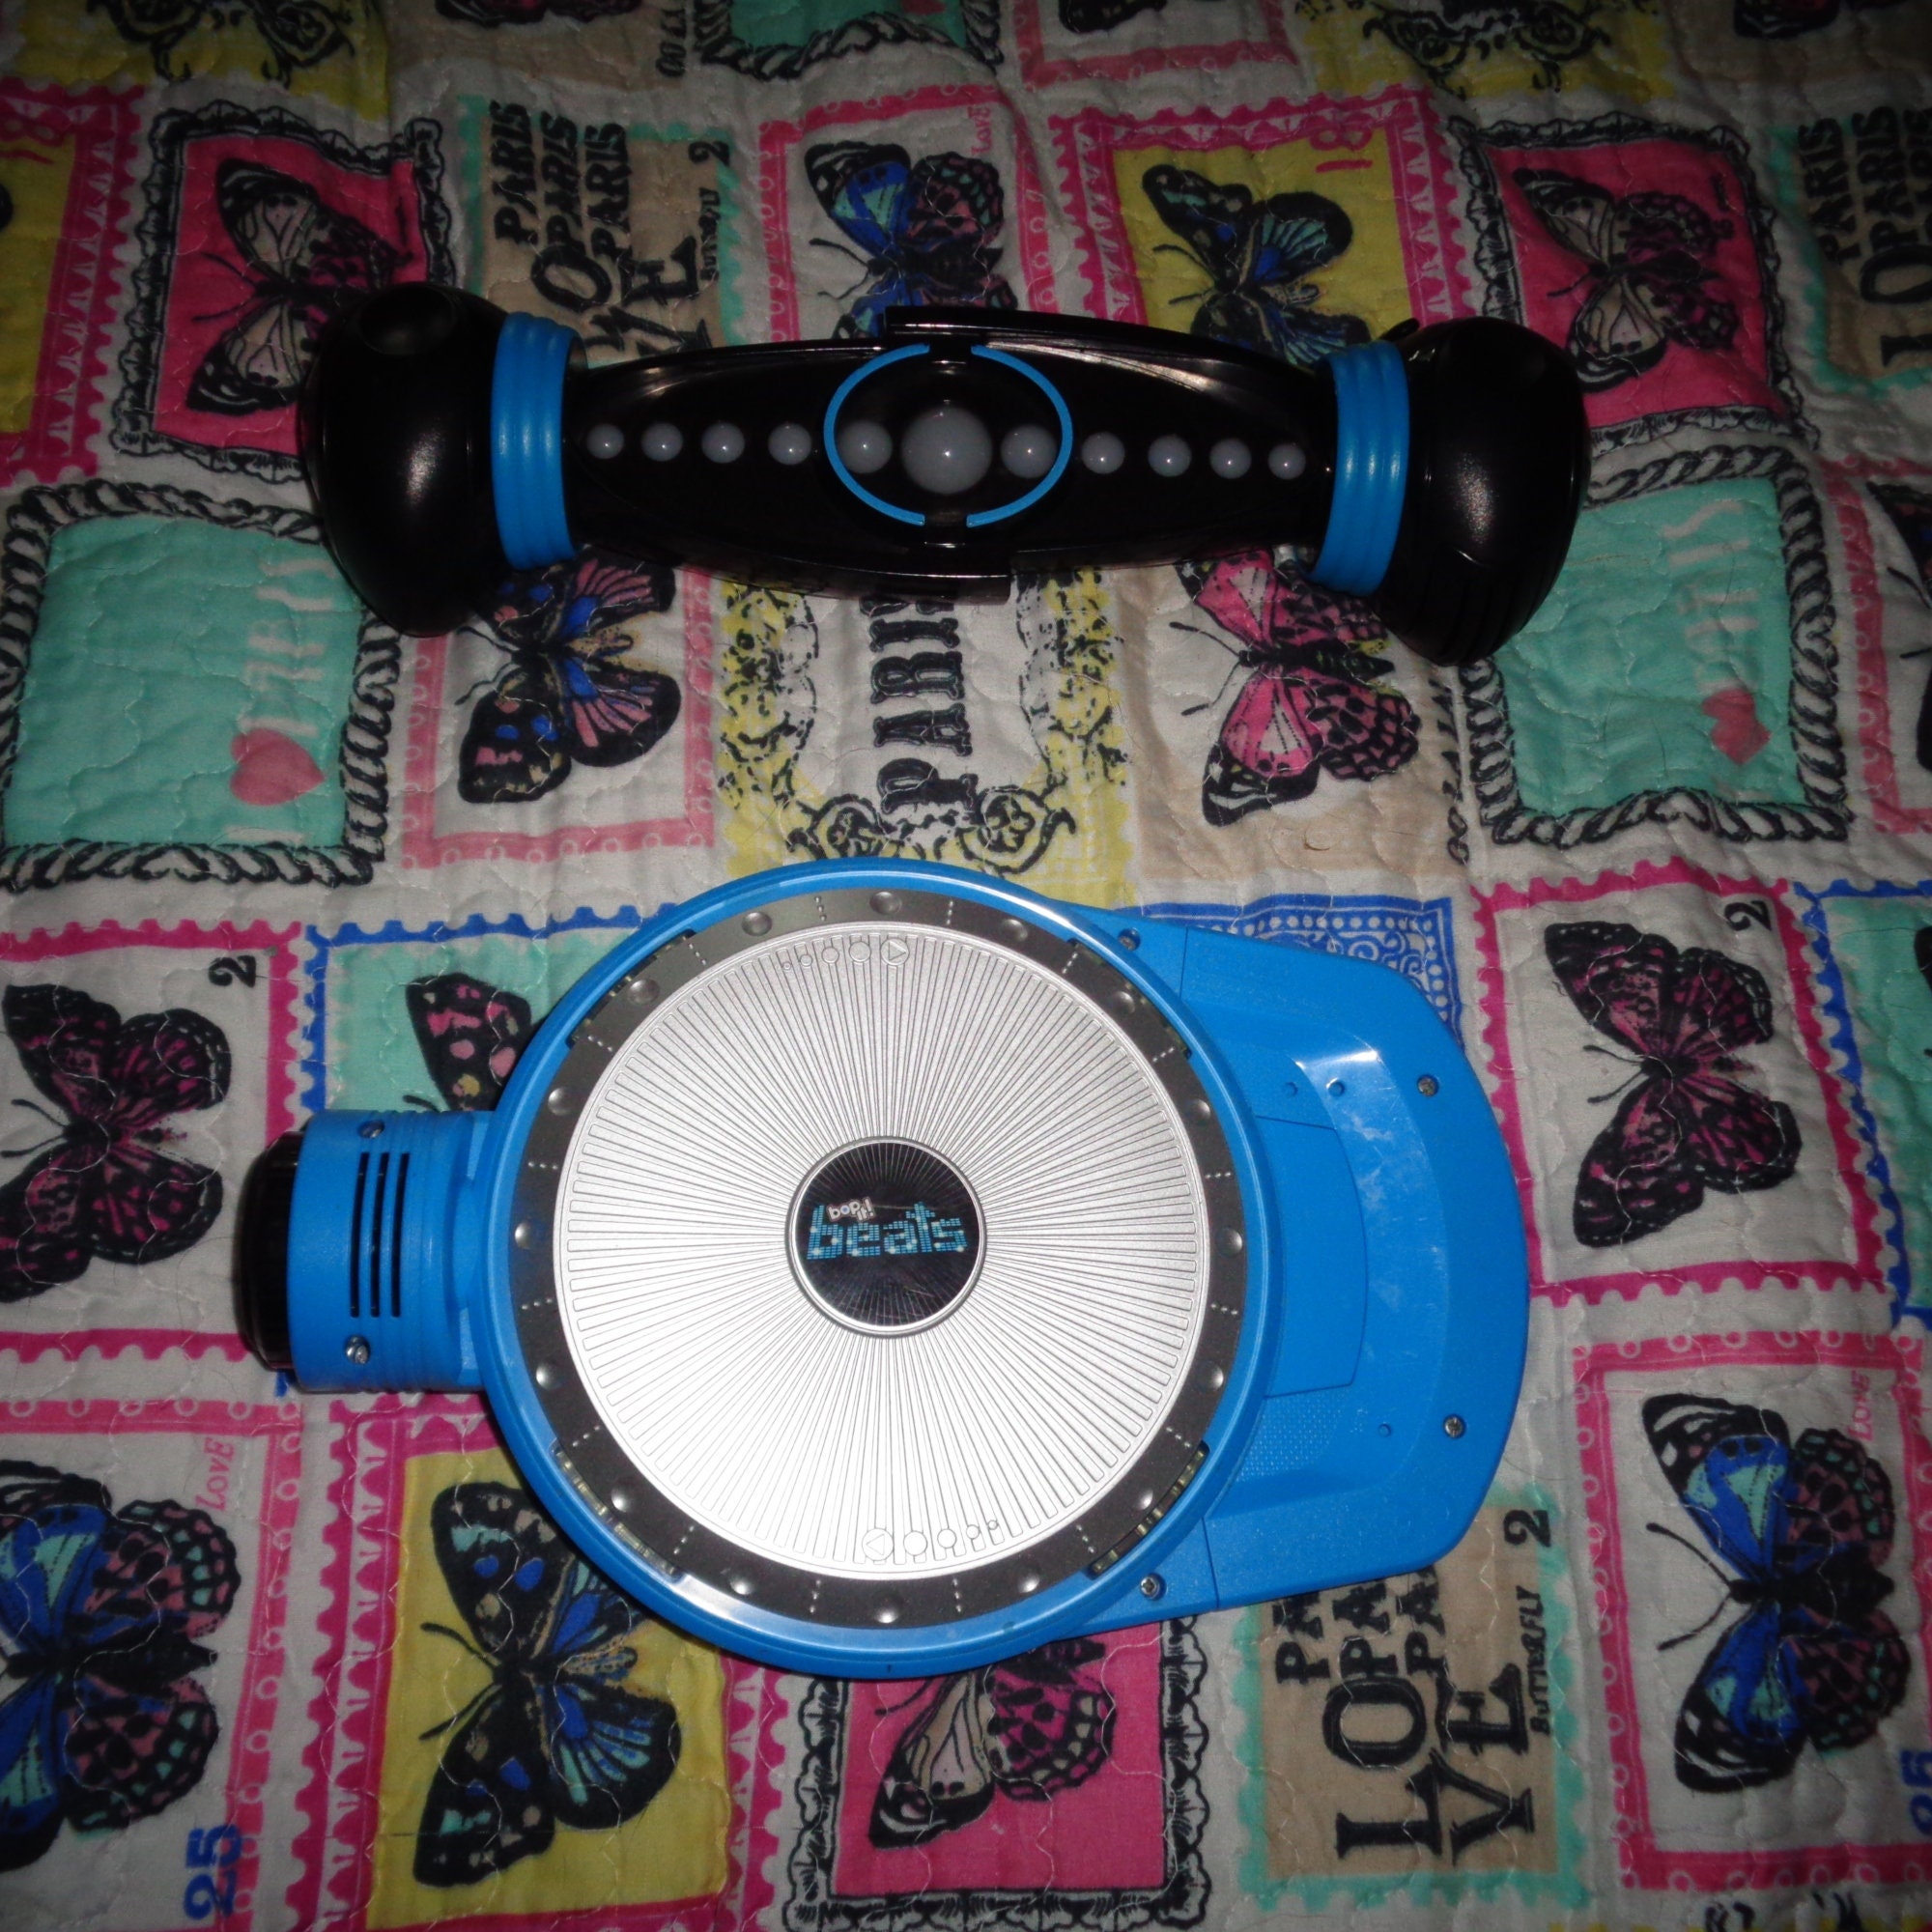 Vintage Bop It Extreme Push and Pull Game by Hasbro 1990s Toy 